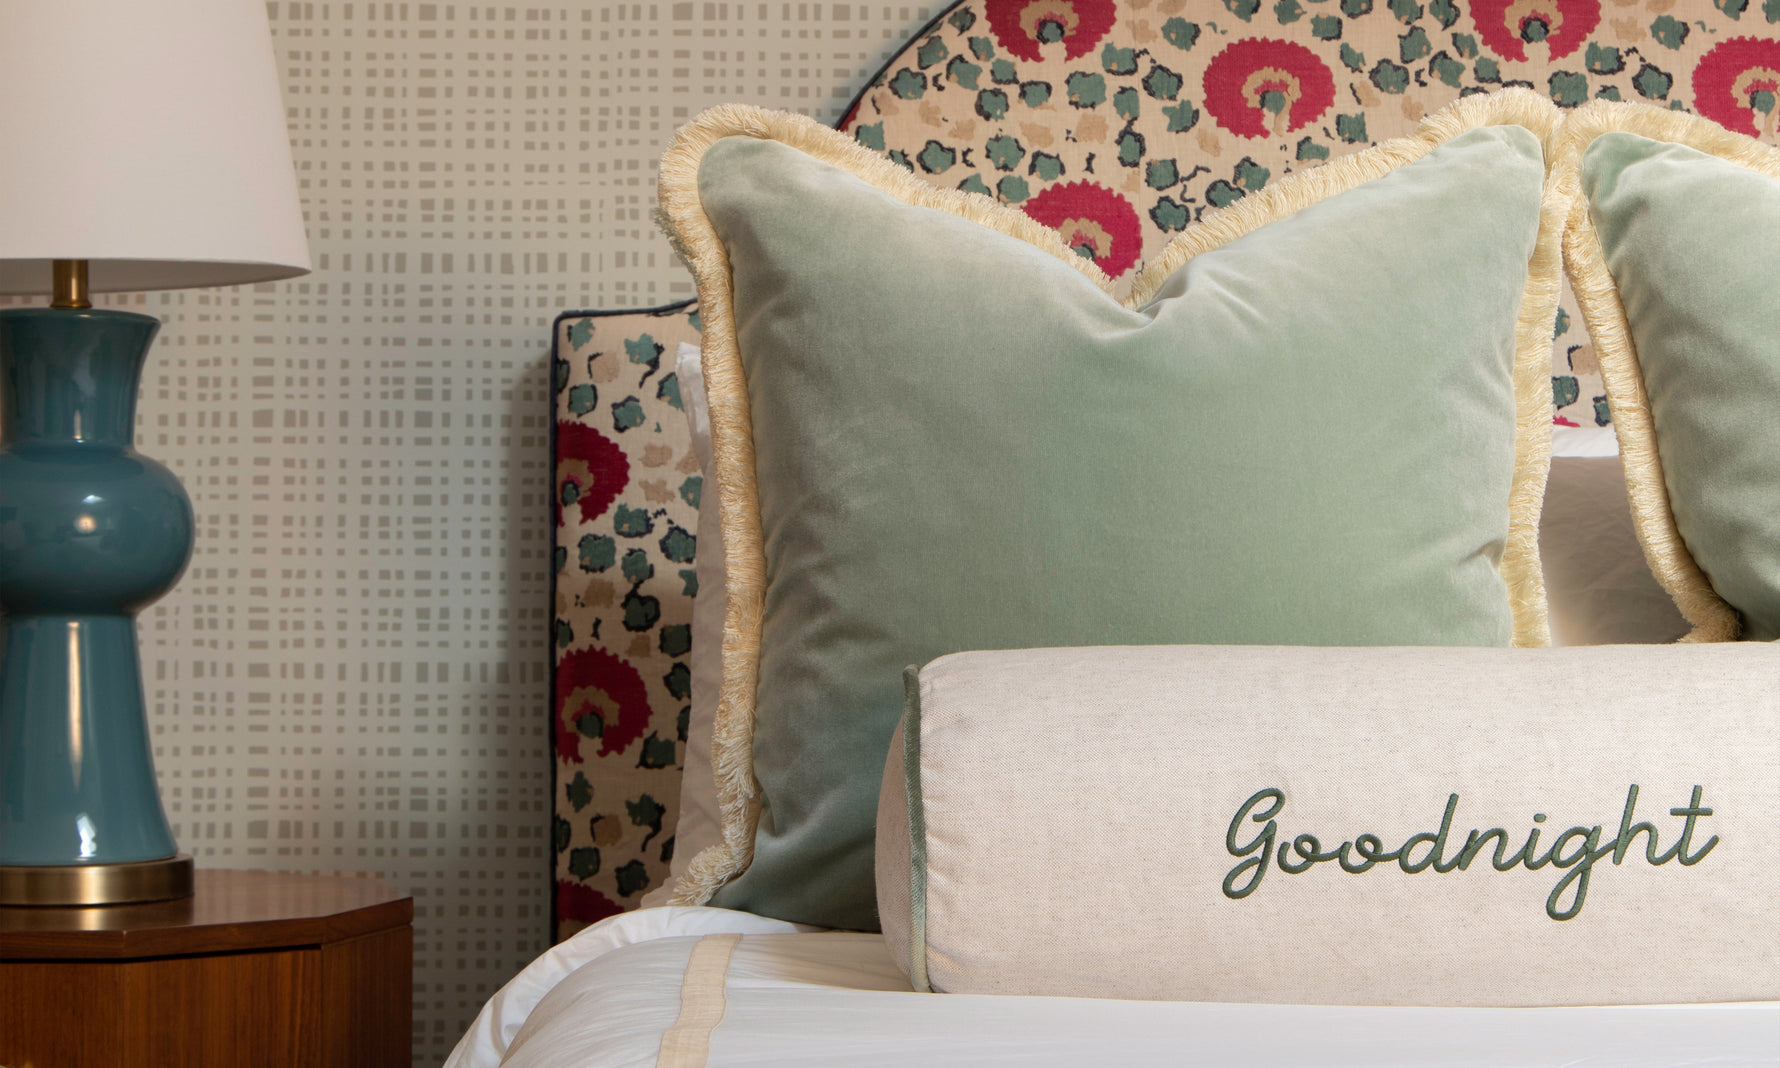 Bed with Sea Salt Velvet Pillows and Goodnight Embroidered Pillow